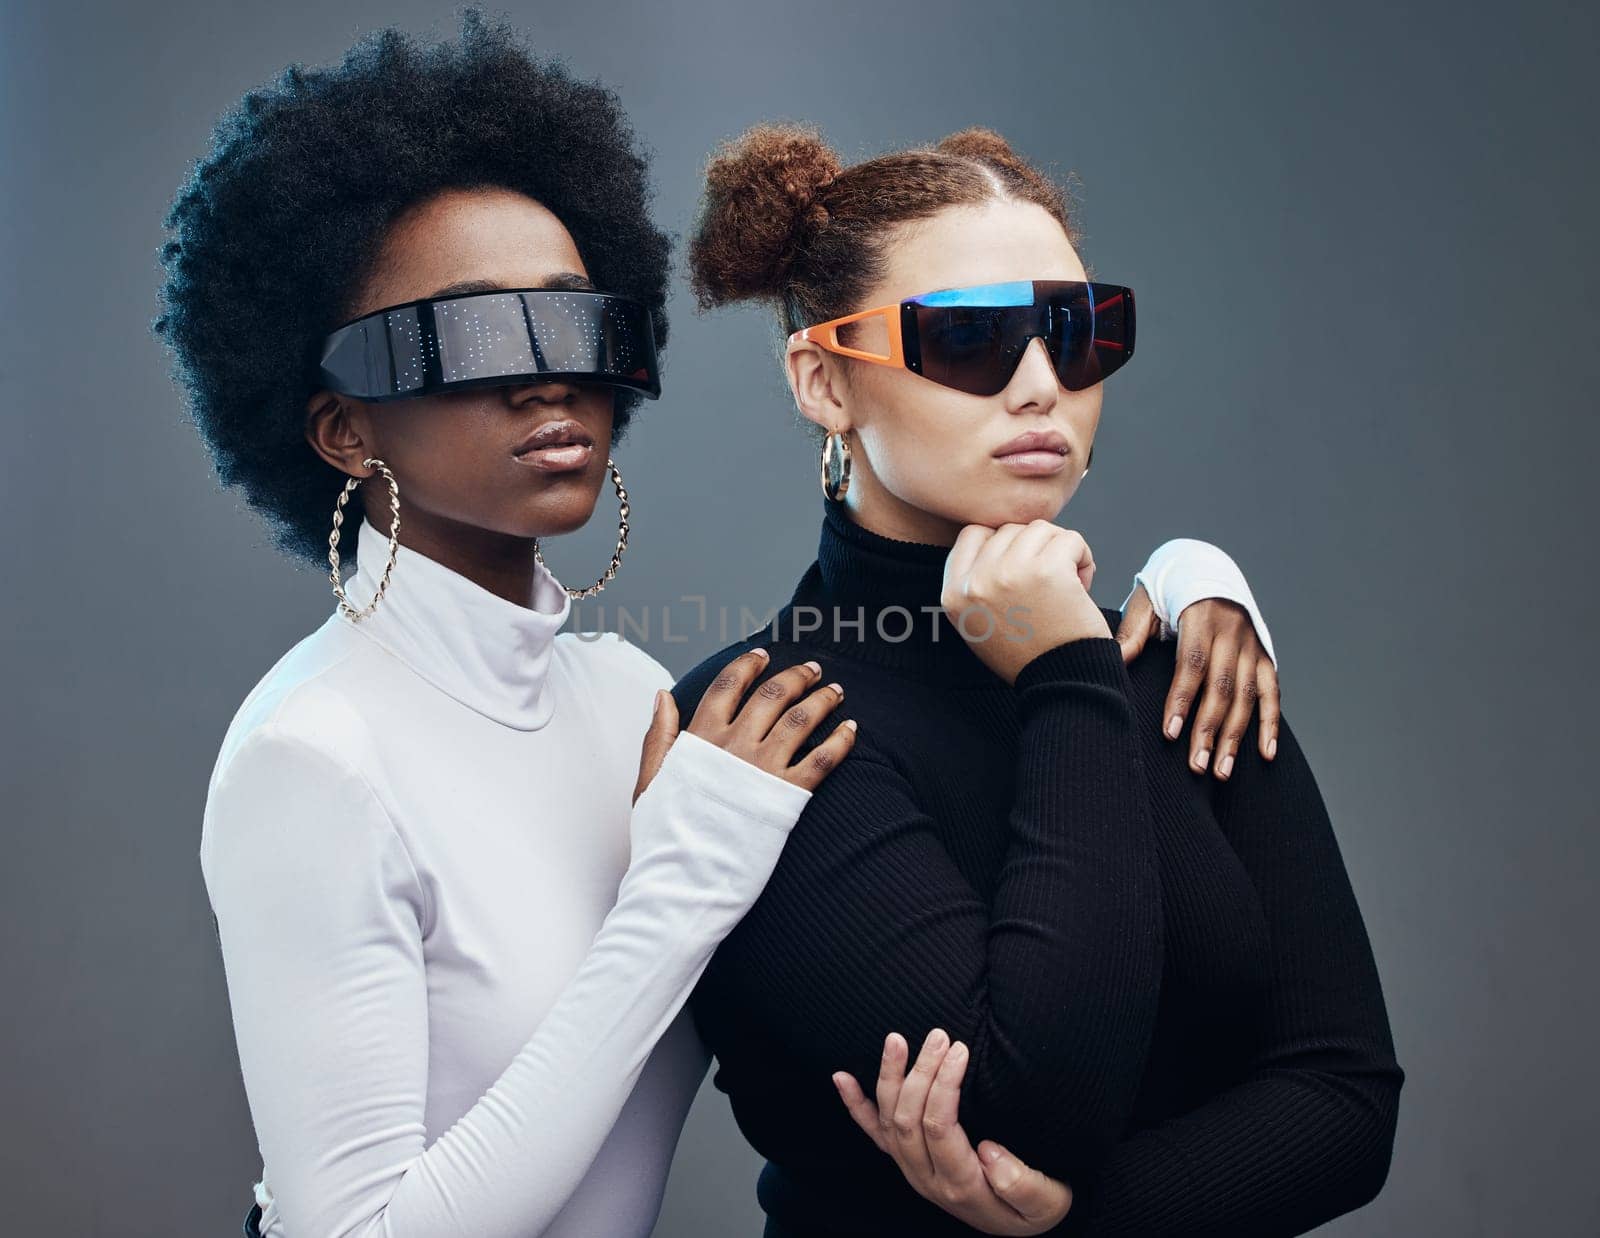 Fashion, futuristic and cyberpunk with women in sunglasses, young and trendy designer brand with gen z youth. Marketing, diversity and future style with vision and edgy against studio background by YuriArcurs